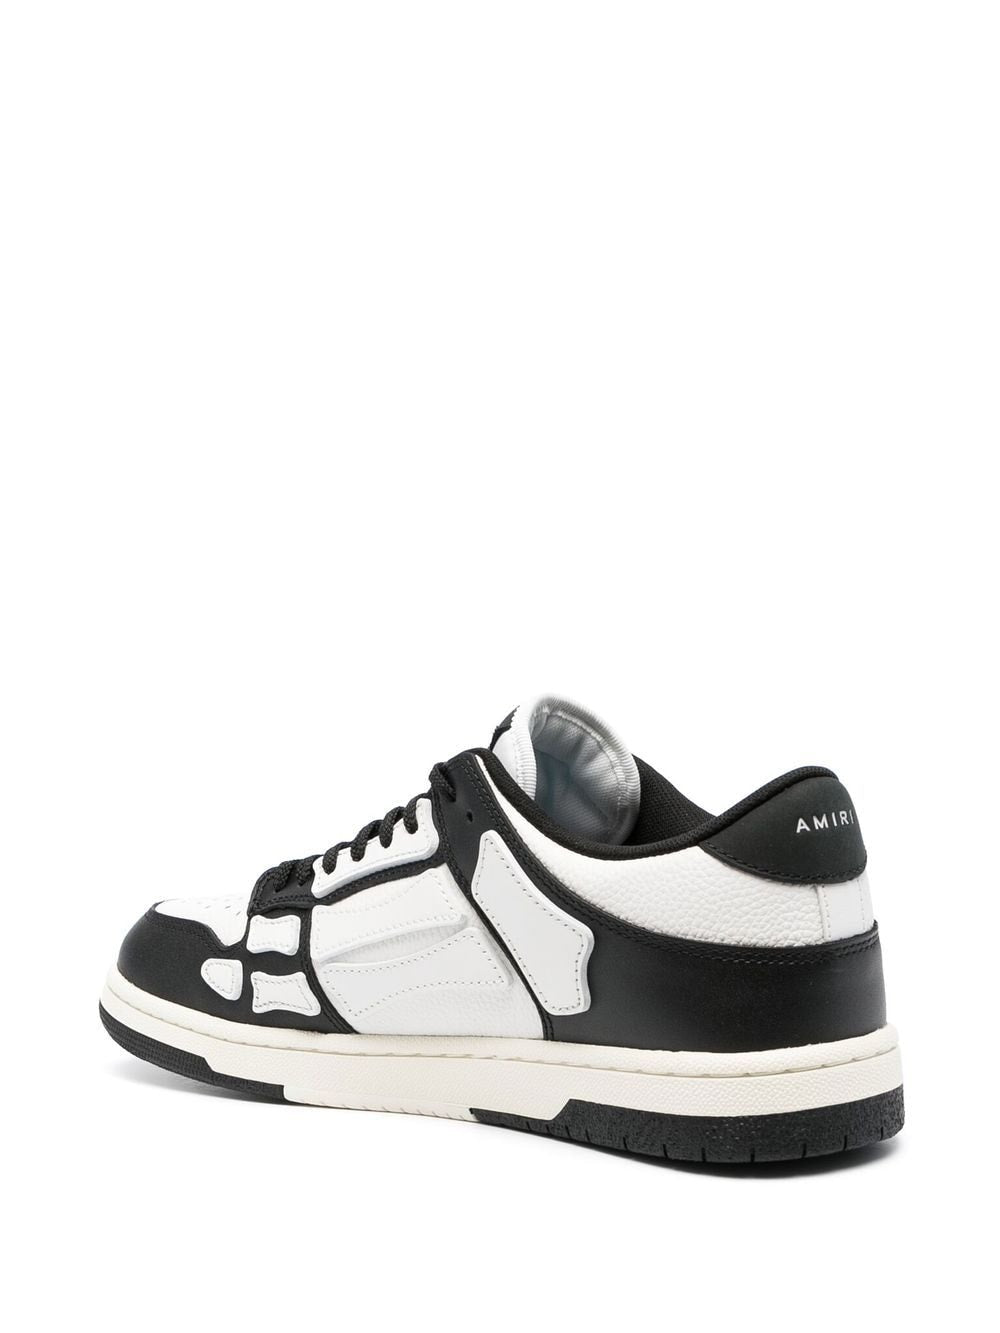 Black Leather Low Top Sneakers with Bone Appliqué